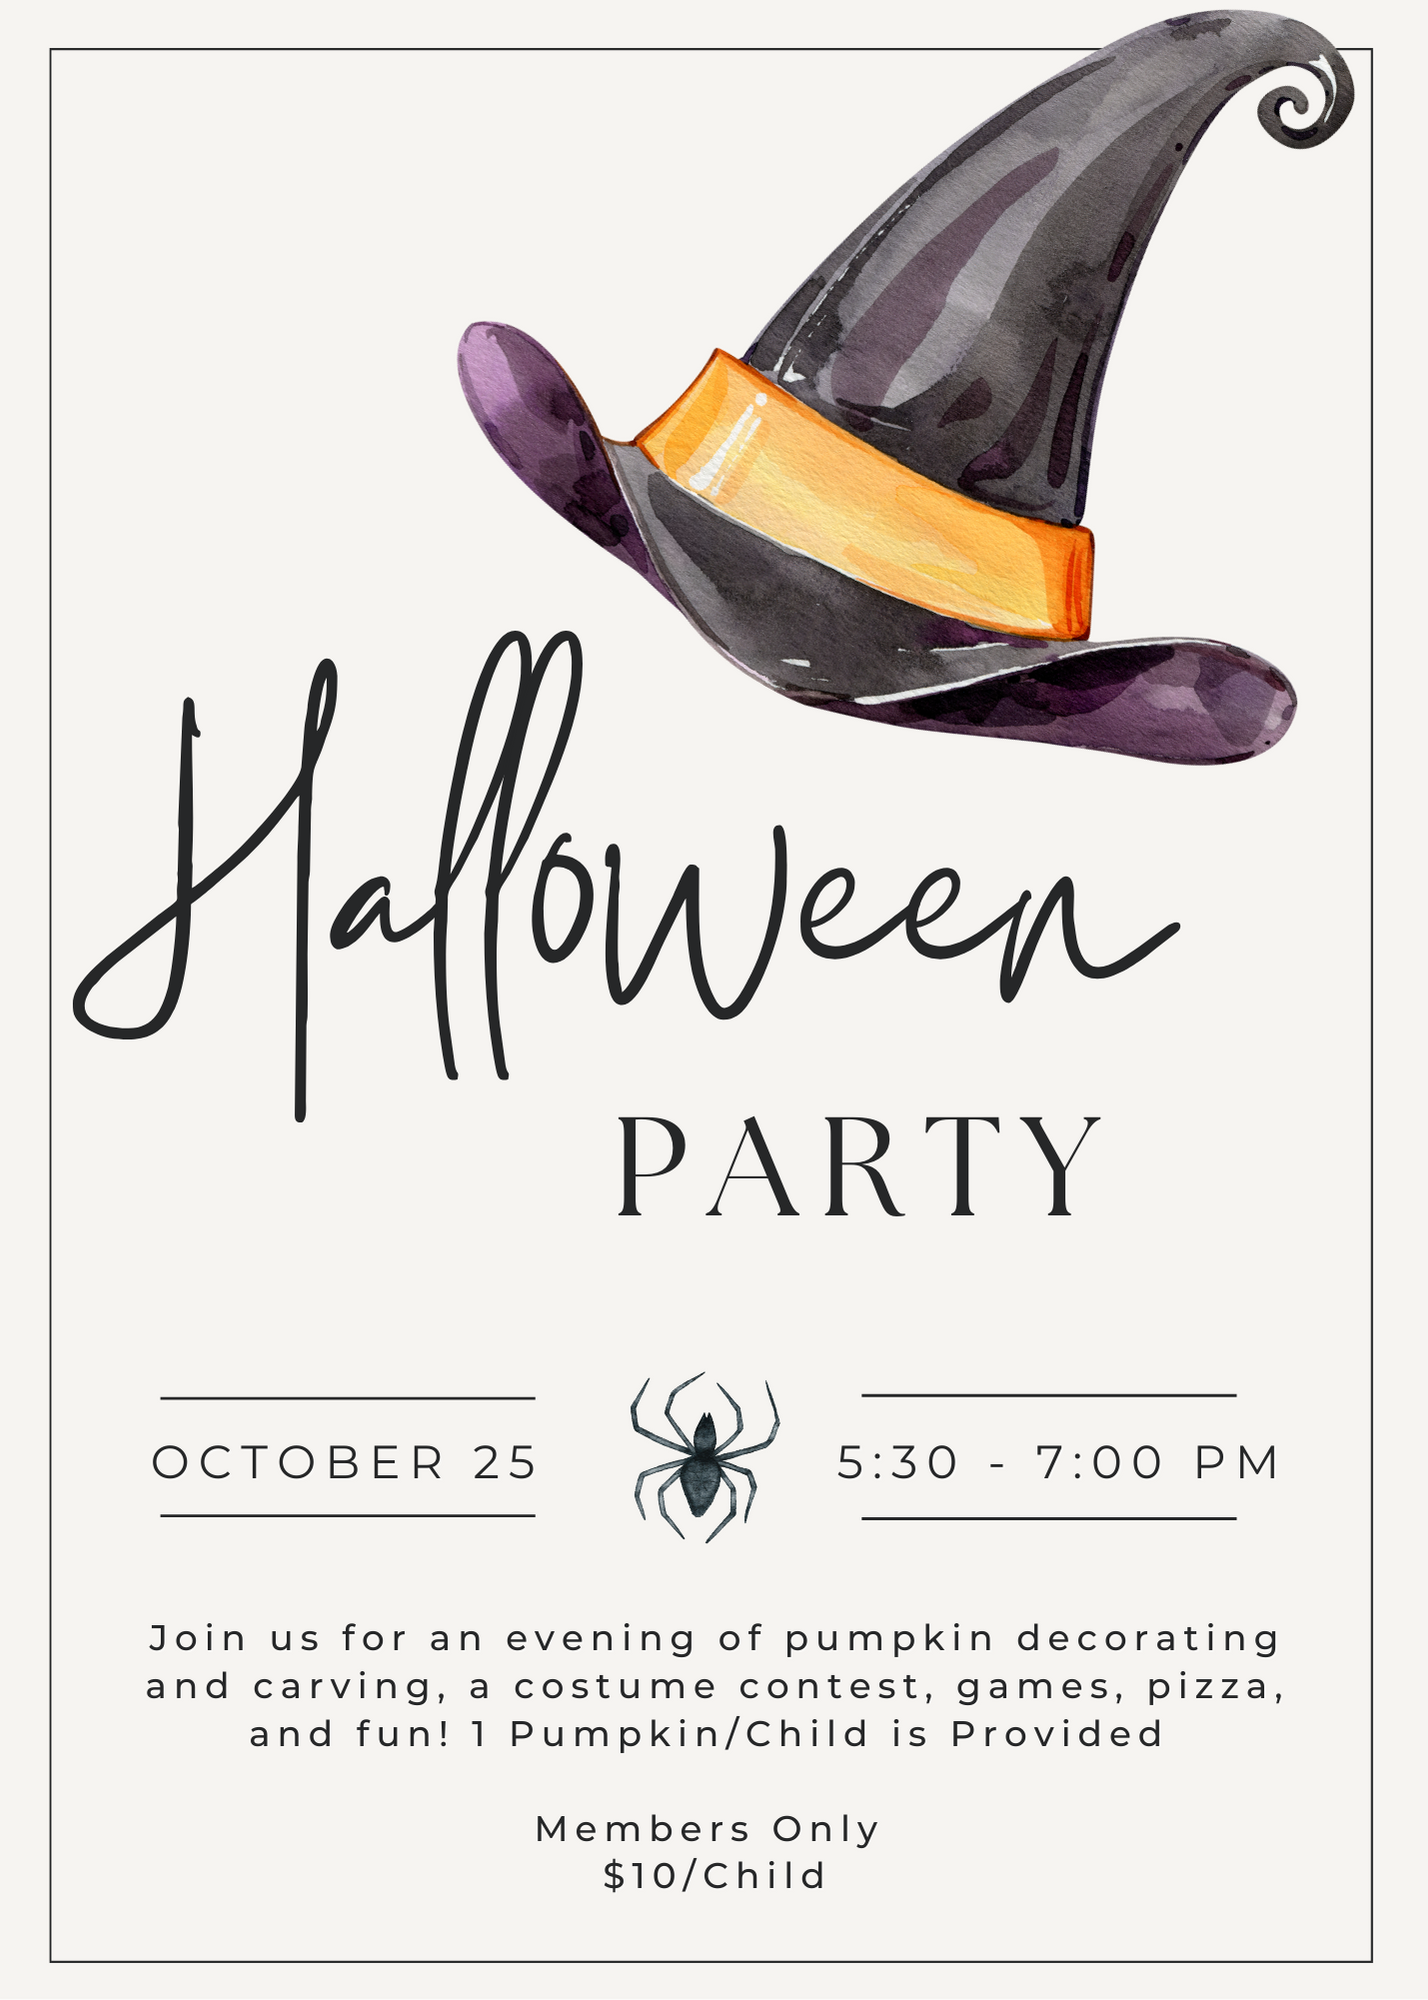 Halloween Party Invitation-5.png